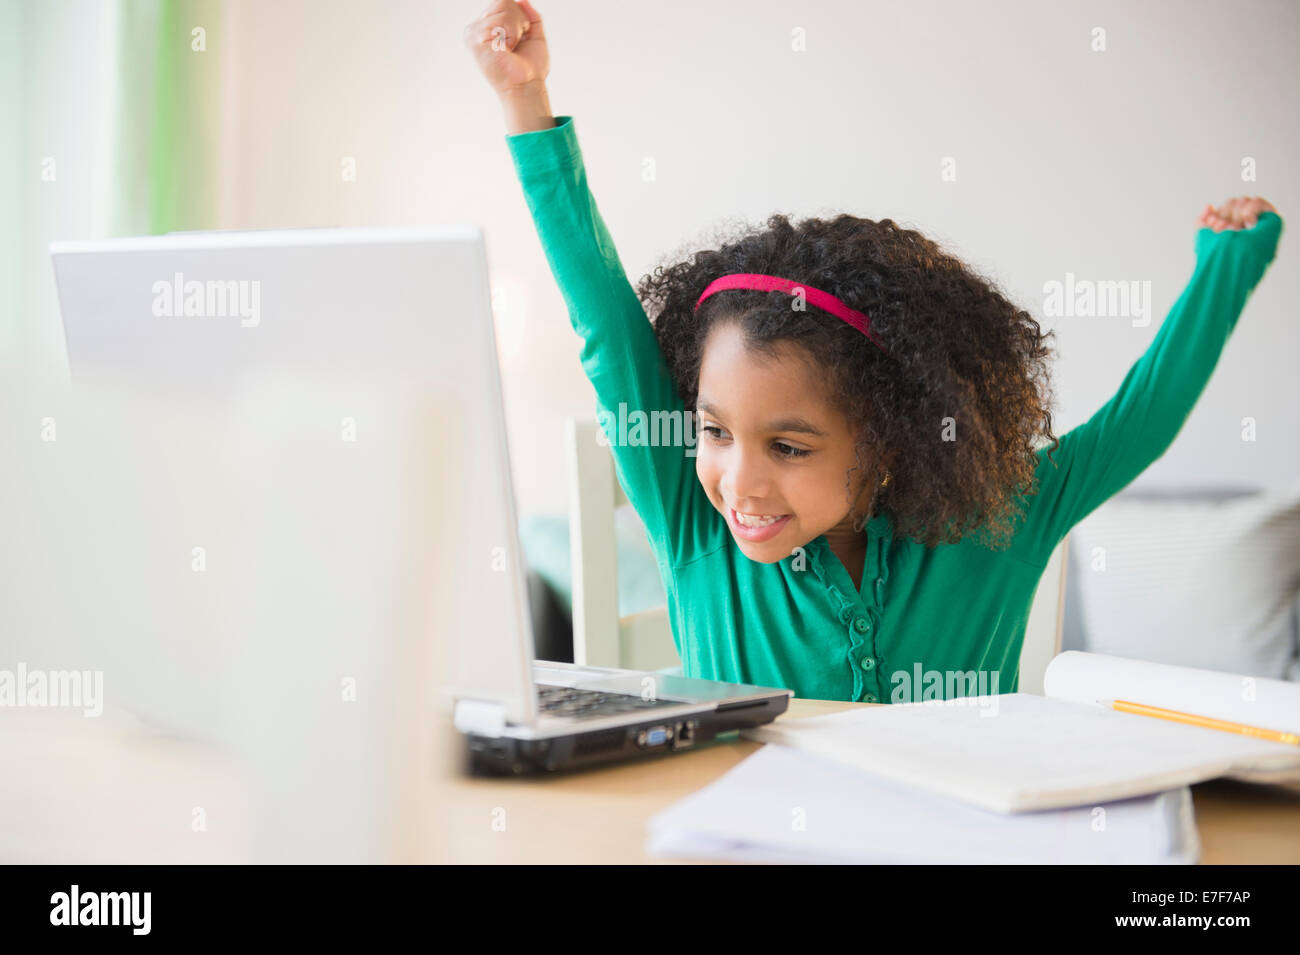 African American girl cheering at laptop Banque D'Images